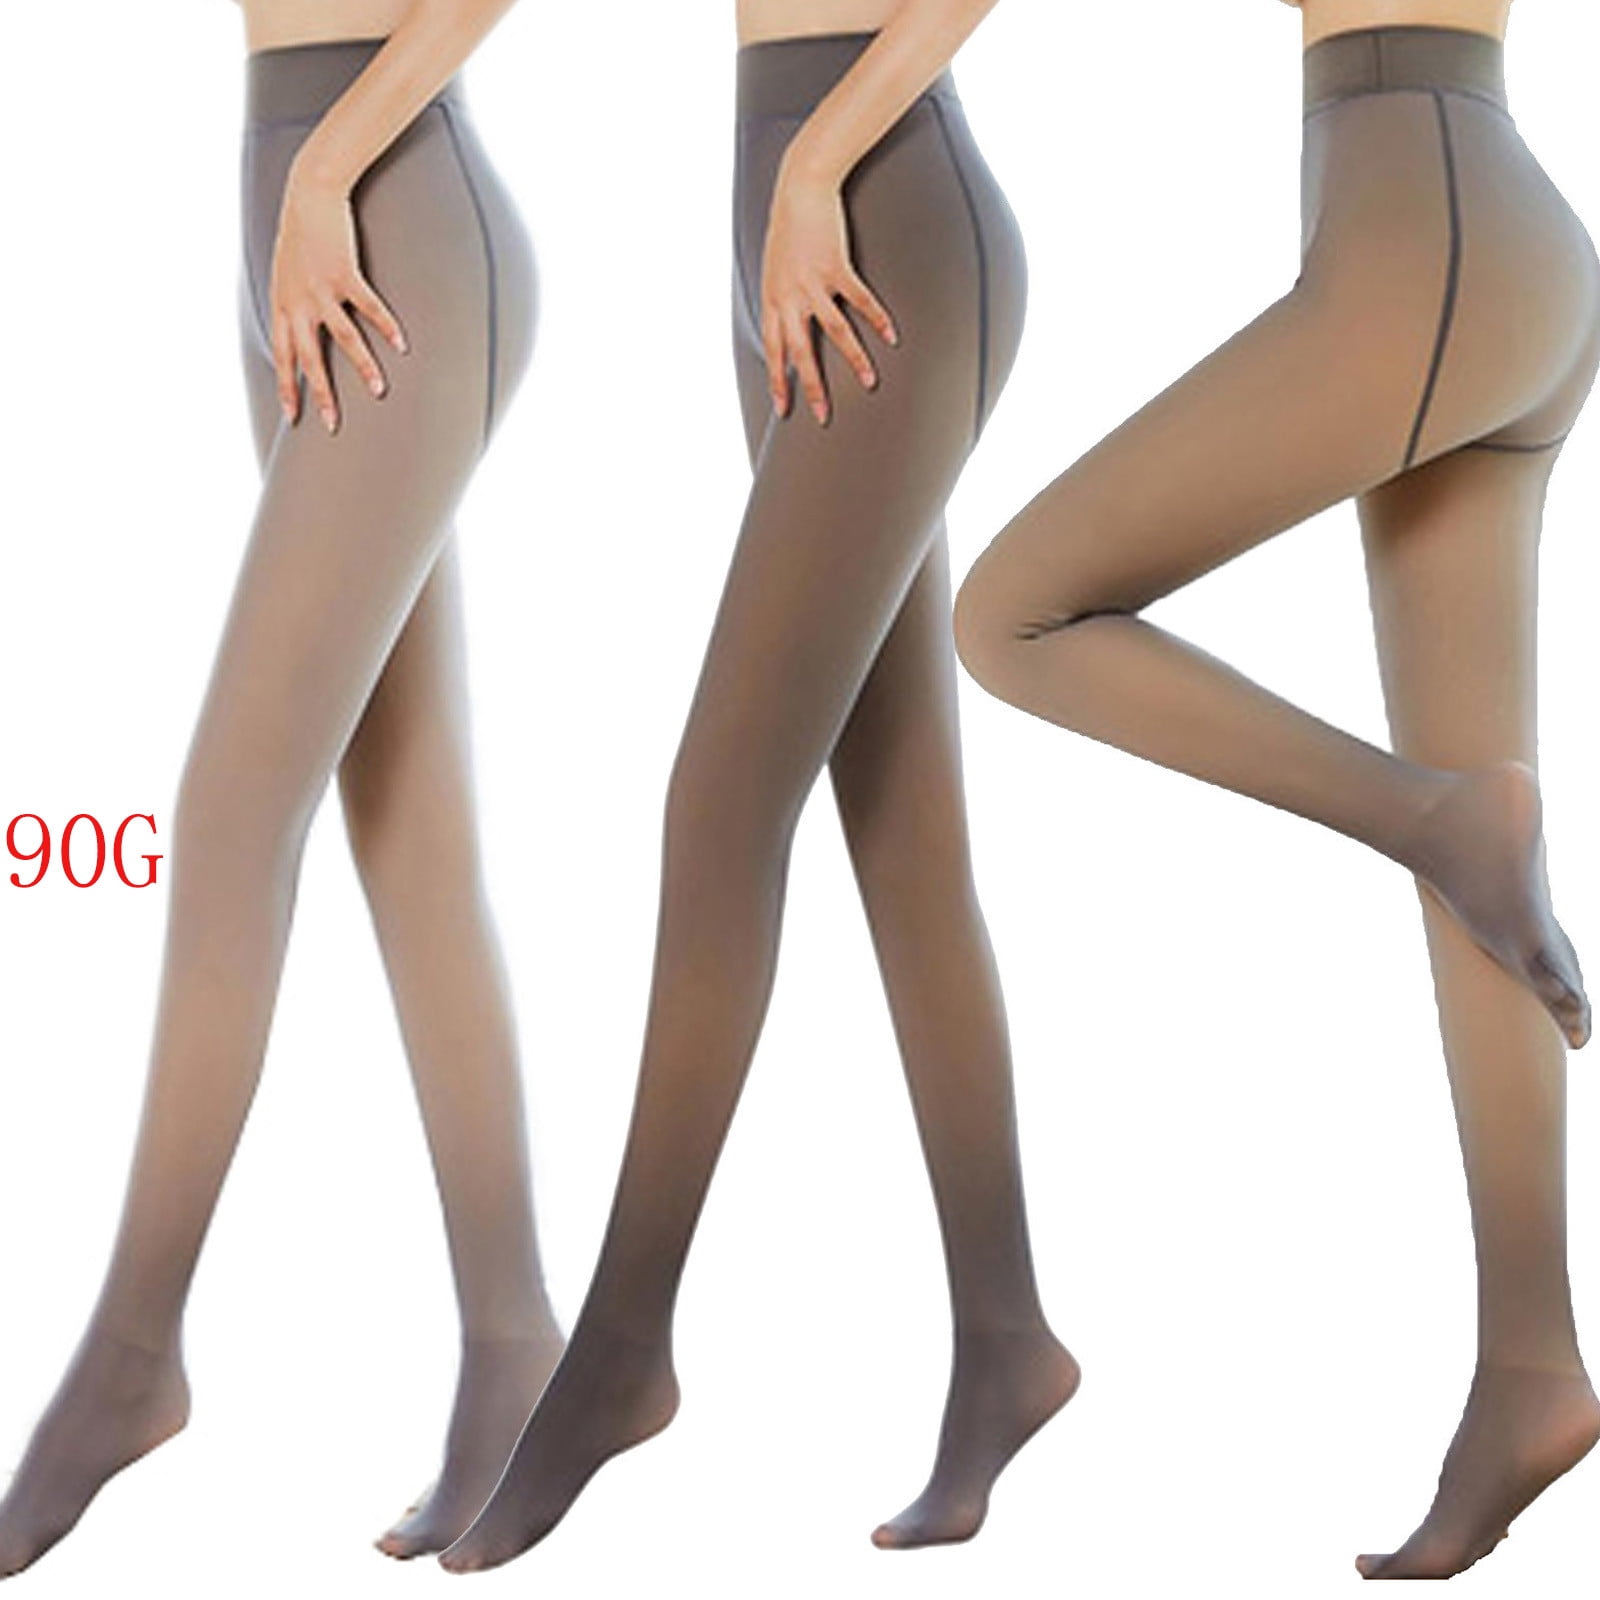 Fleece Lined Tights Women, Warm Pantyhose leggings Women,Fake Translucent Thermal  Skin Colored Tights for Winter 